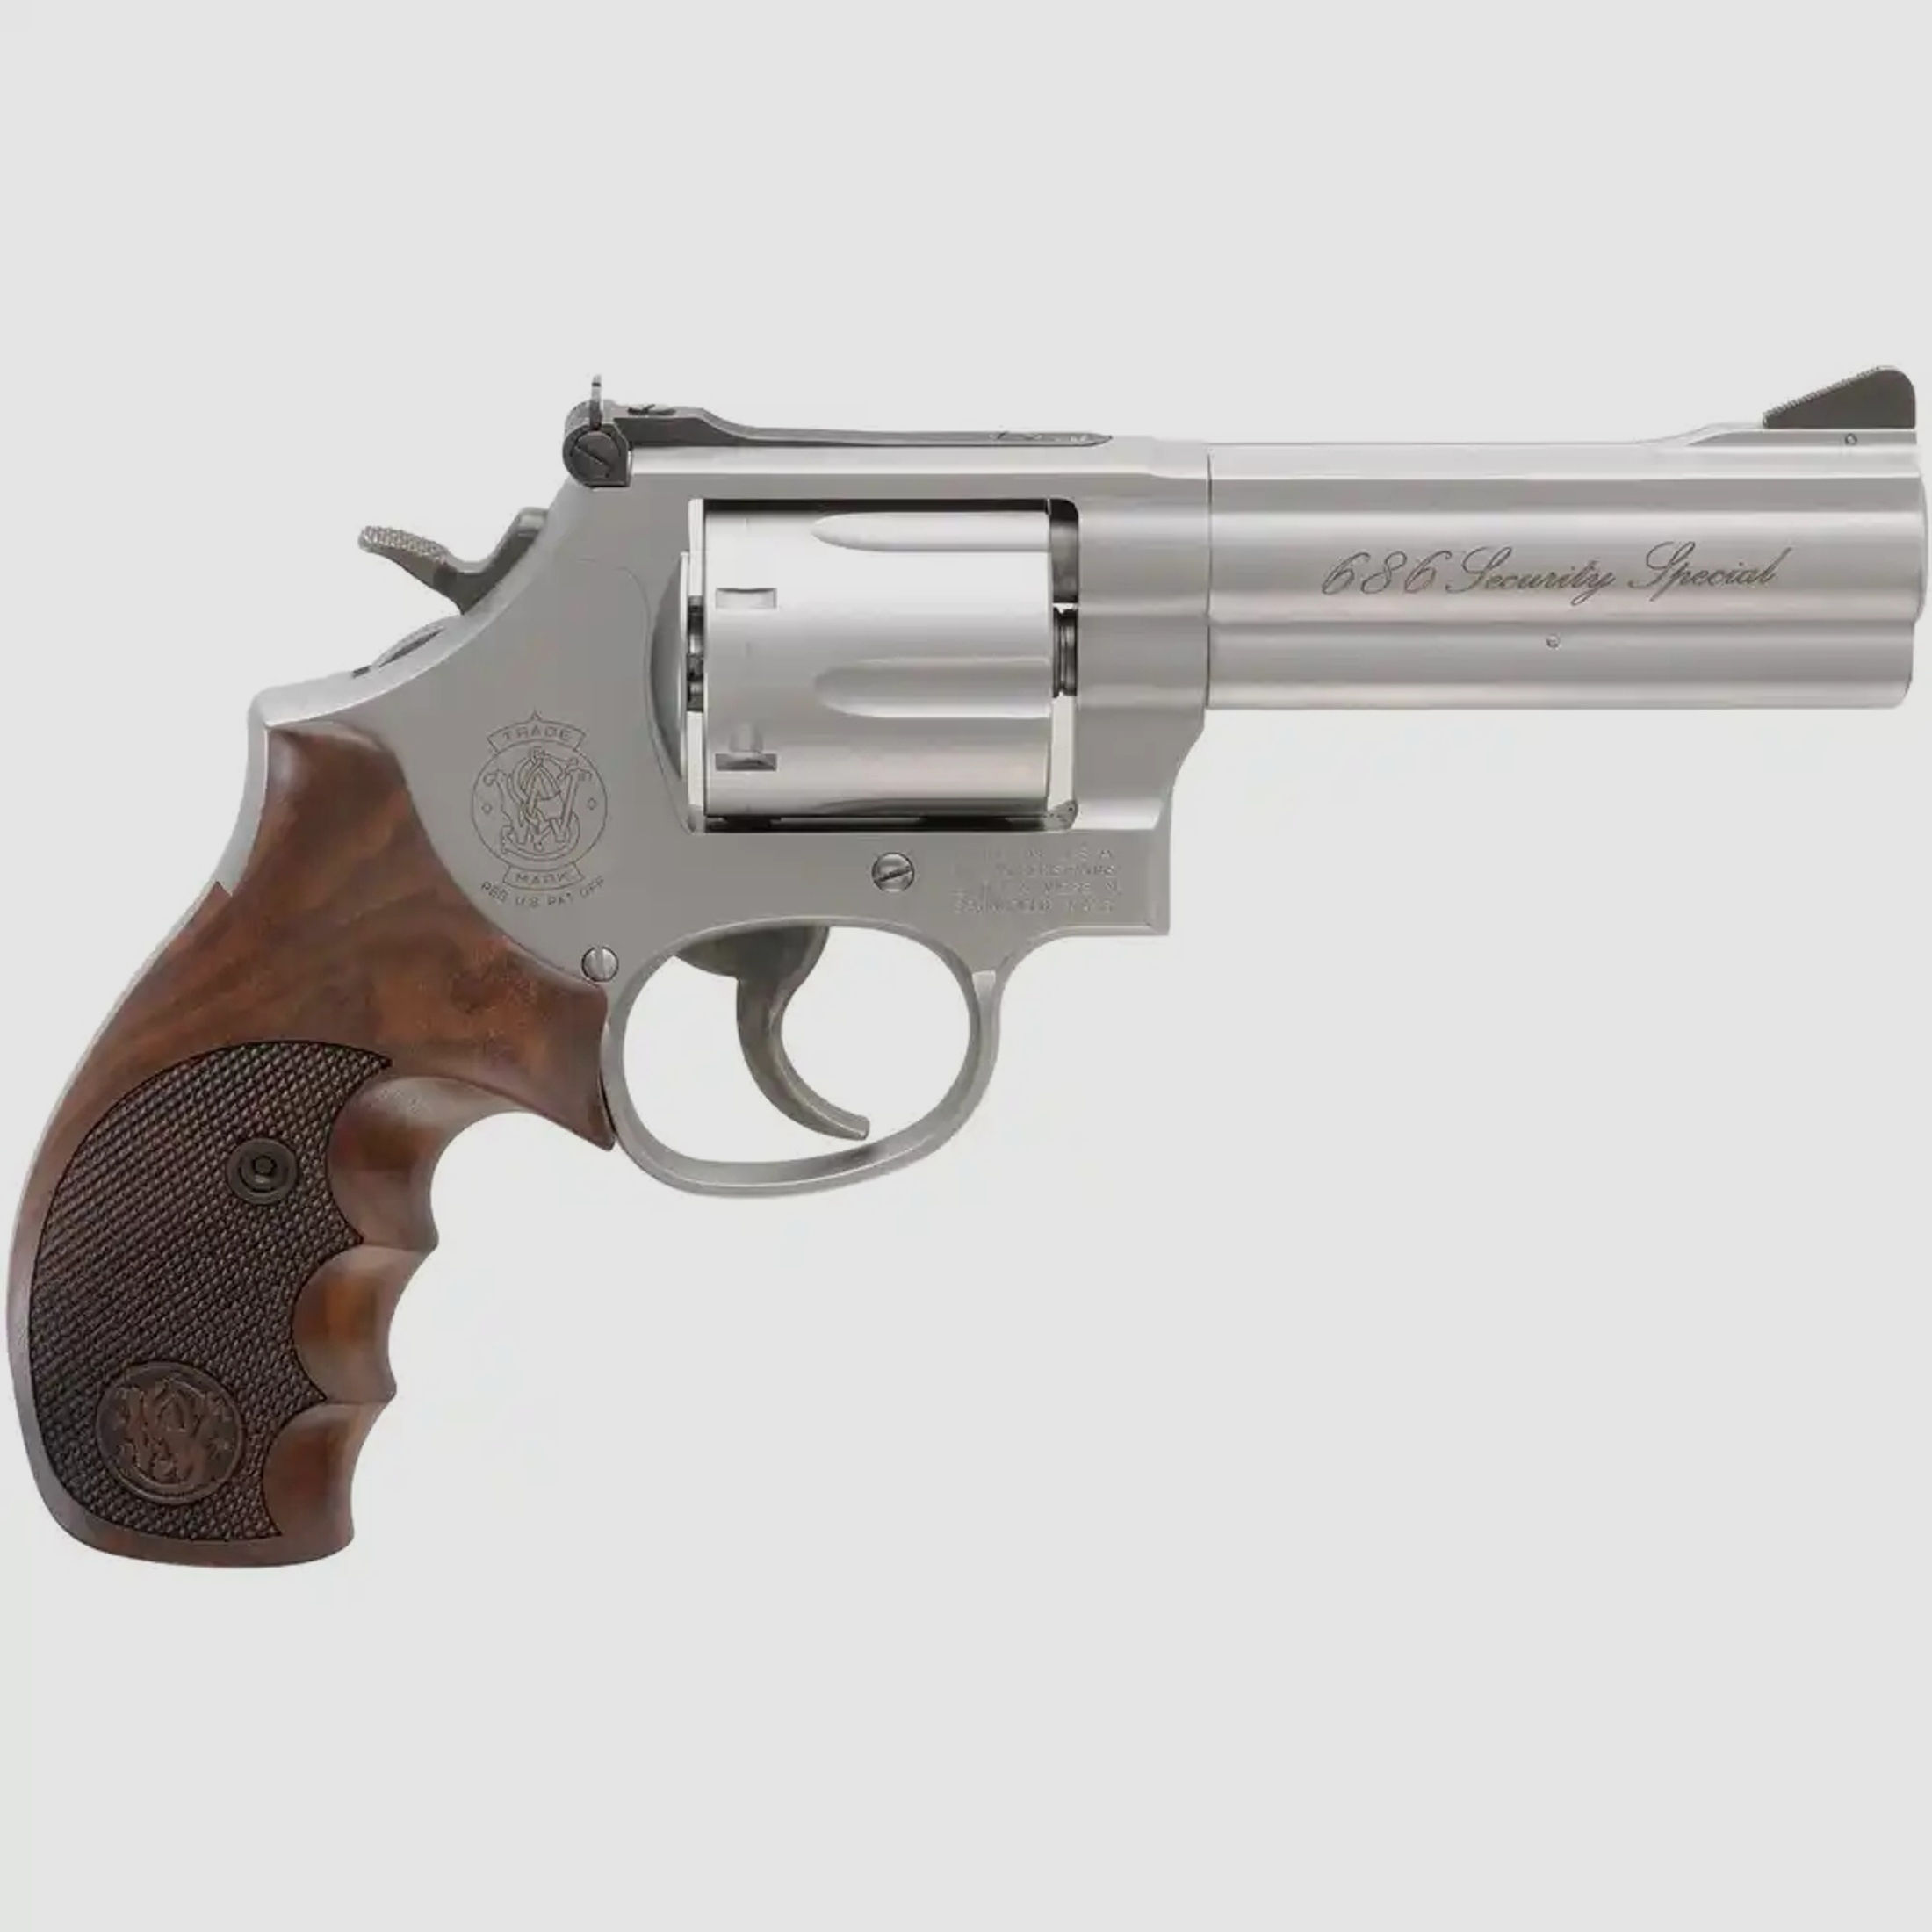 Smith & Wesson Revolver M686 "Security Special", 4", RB, .357 Mag. stainless/matt, NILL-Combatgriff